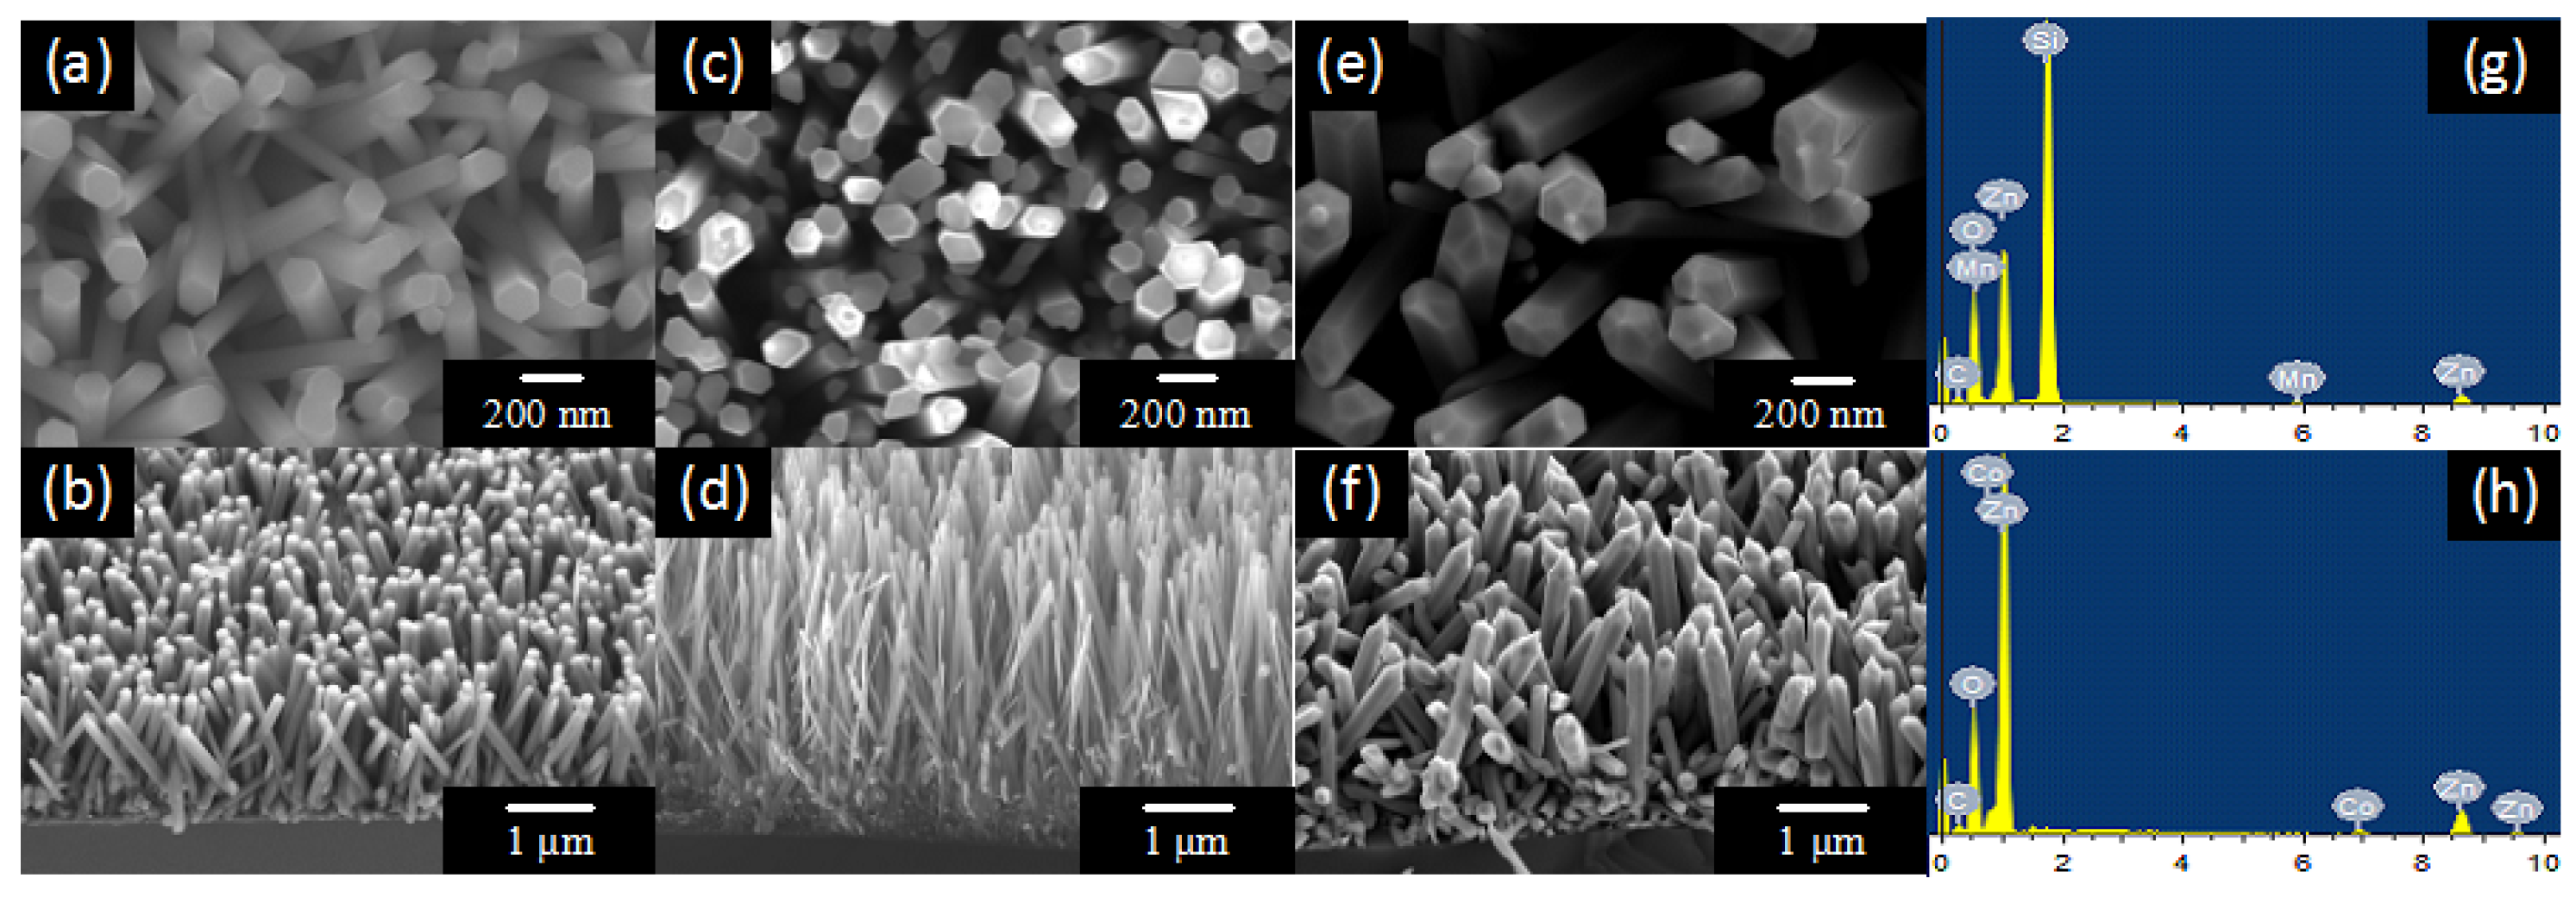 Nanomaterials Free Full Text Enhanced Visible Light Photocatalytic Activity Of Zno Nanowires Doped With Mn2 And Co2 Ions Html